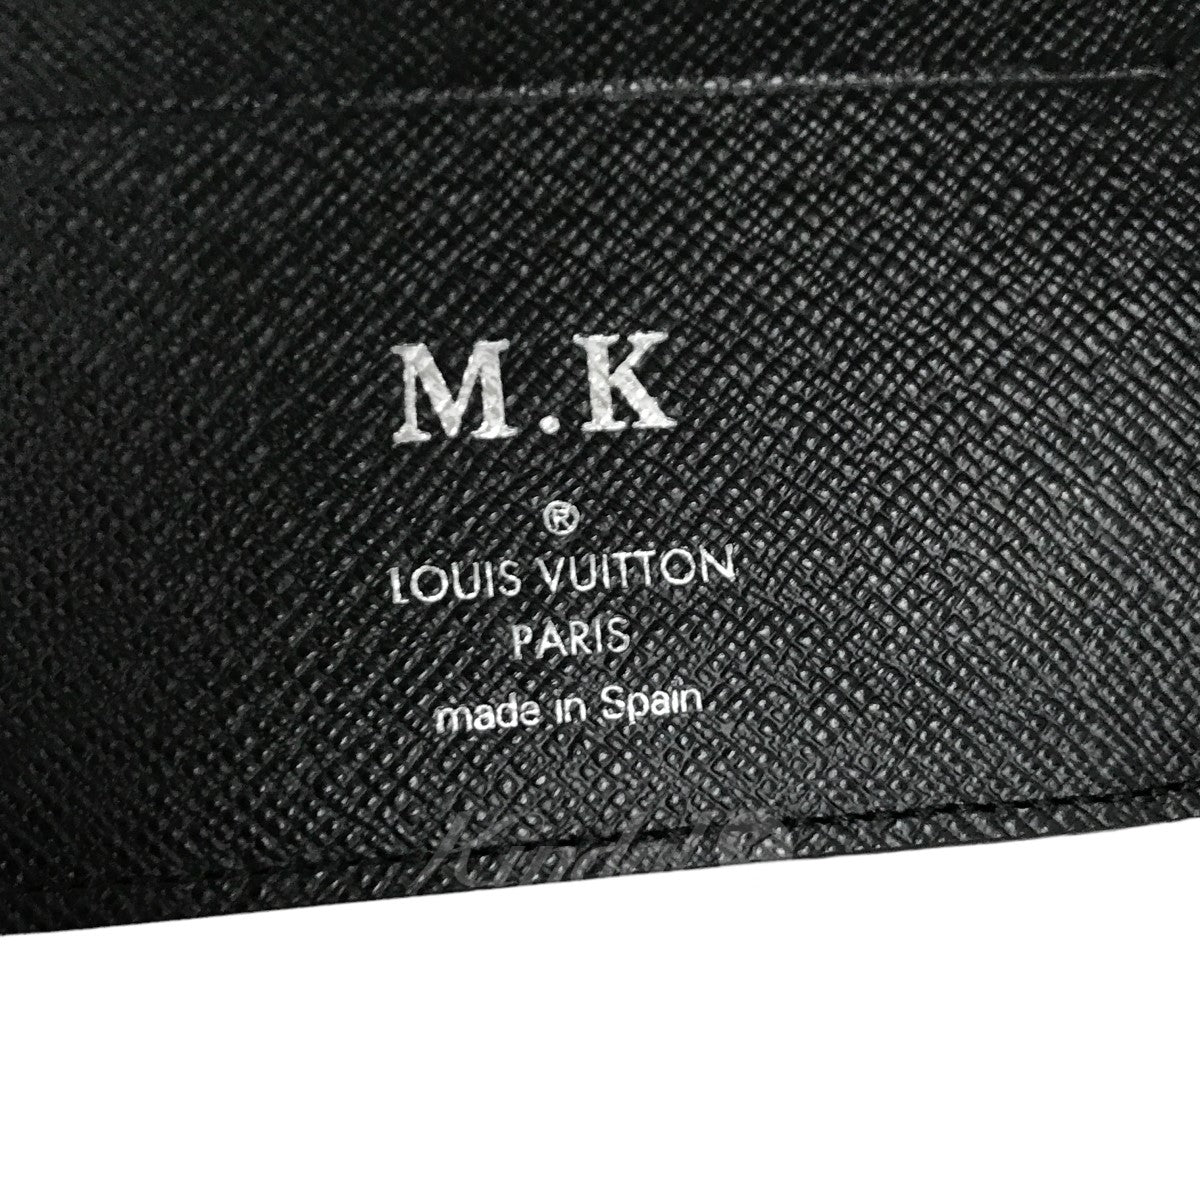 LOUIS VUITTON(ルイヴィトン) ダミエ グラフィット ポルトフォイユ ...